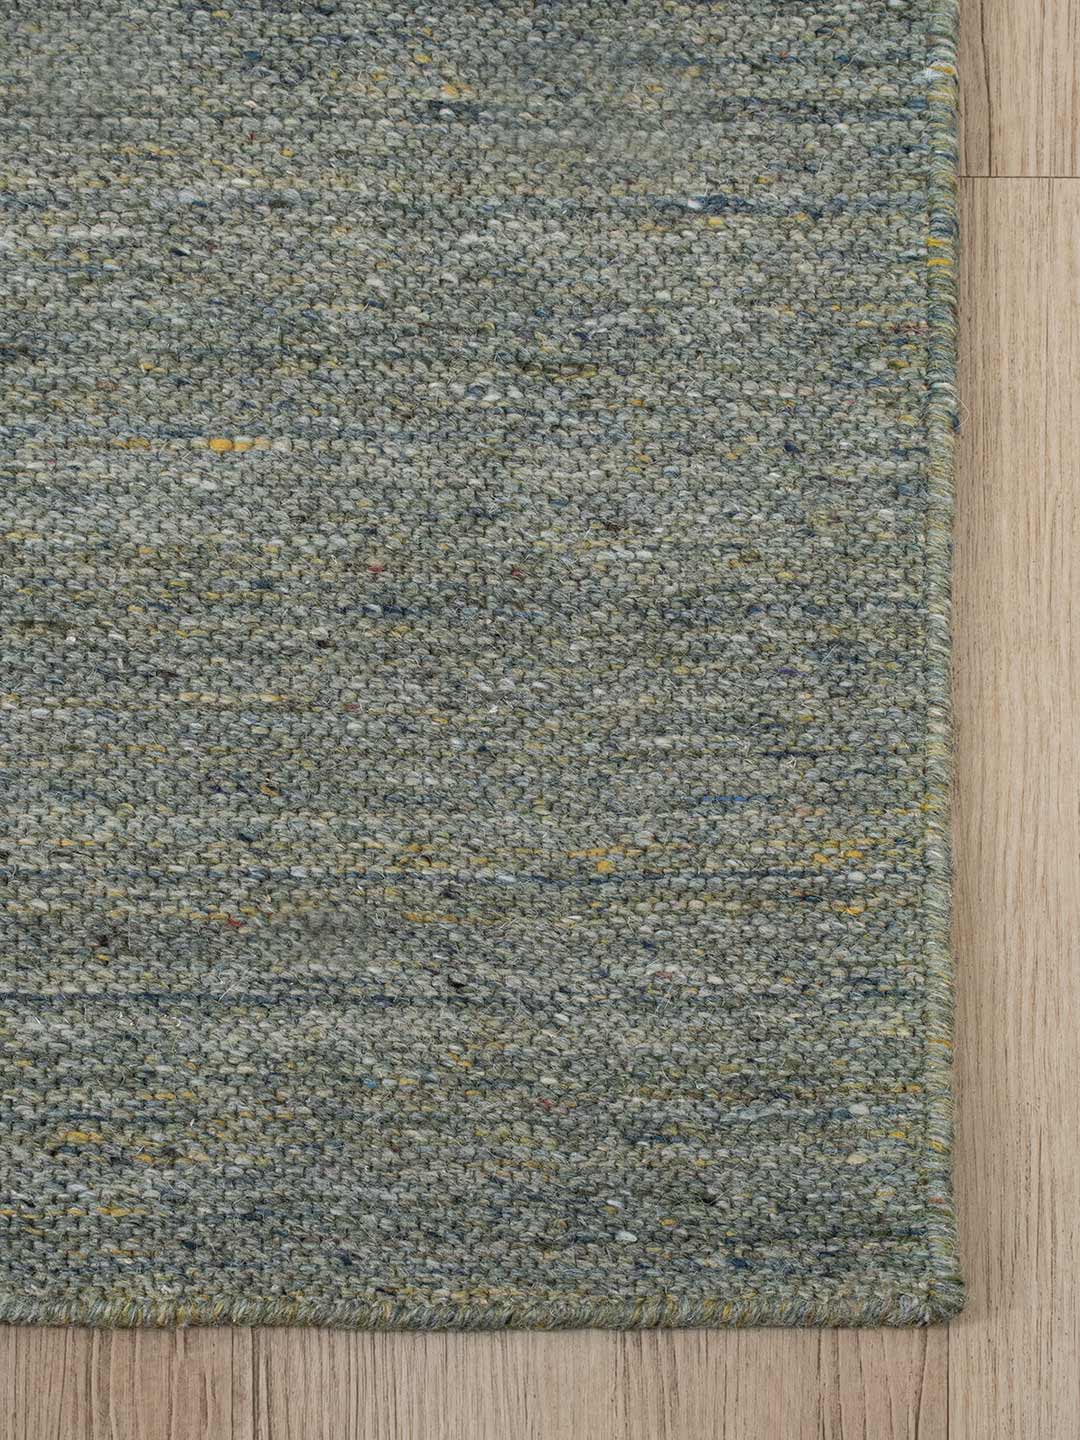 Layla Sage Rug 20% off from the Rug Collection Stockist Make Your House A Home, Furniture Store Bendigo. Free Australia Wide Delivery